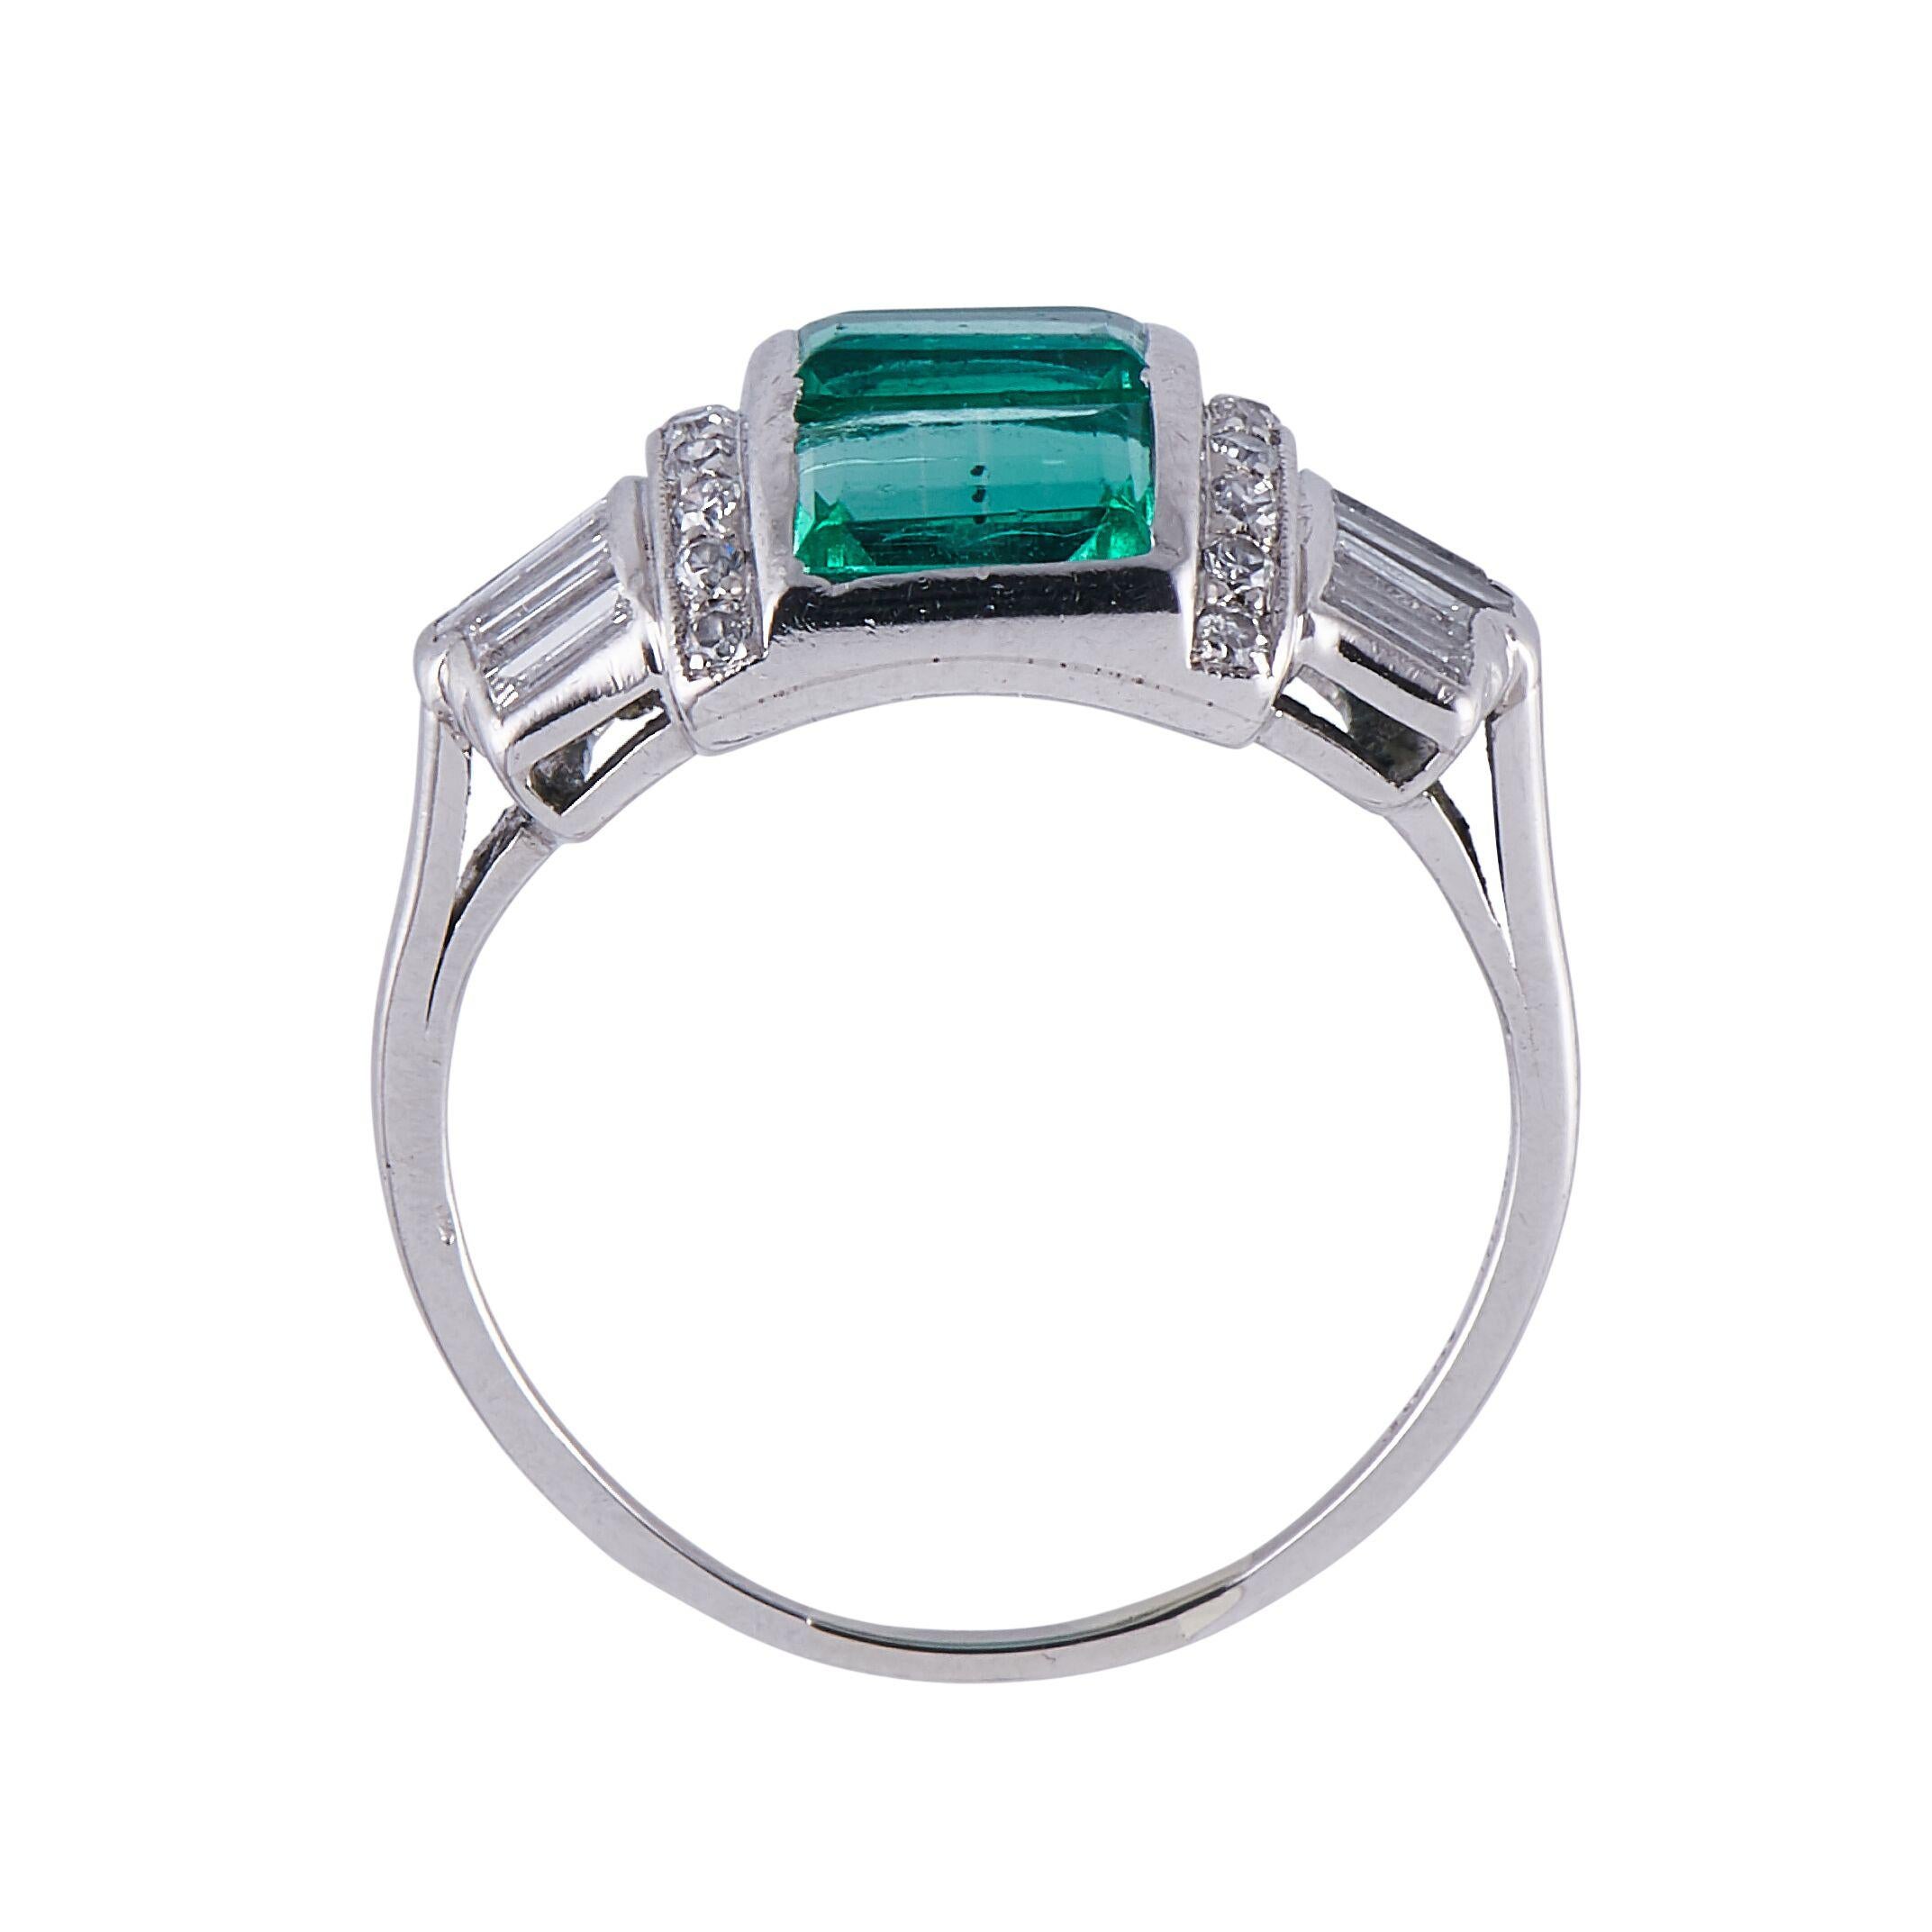 Antique, Art Deco, Platinum, Natural Colombian Emerald and Diamond Ring In Good Condition For Sale In Rochford, Essex